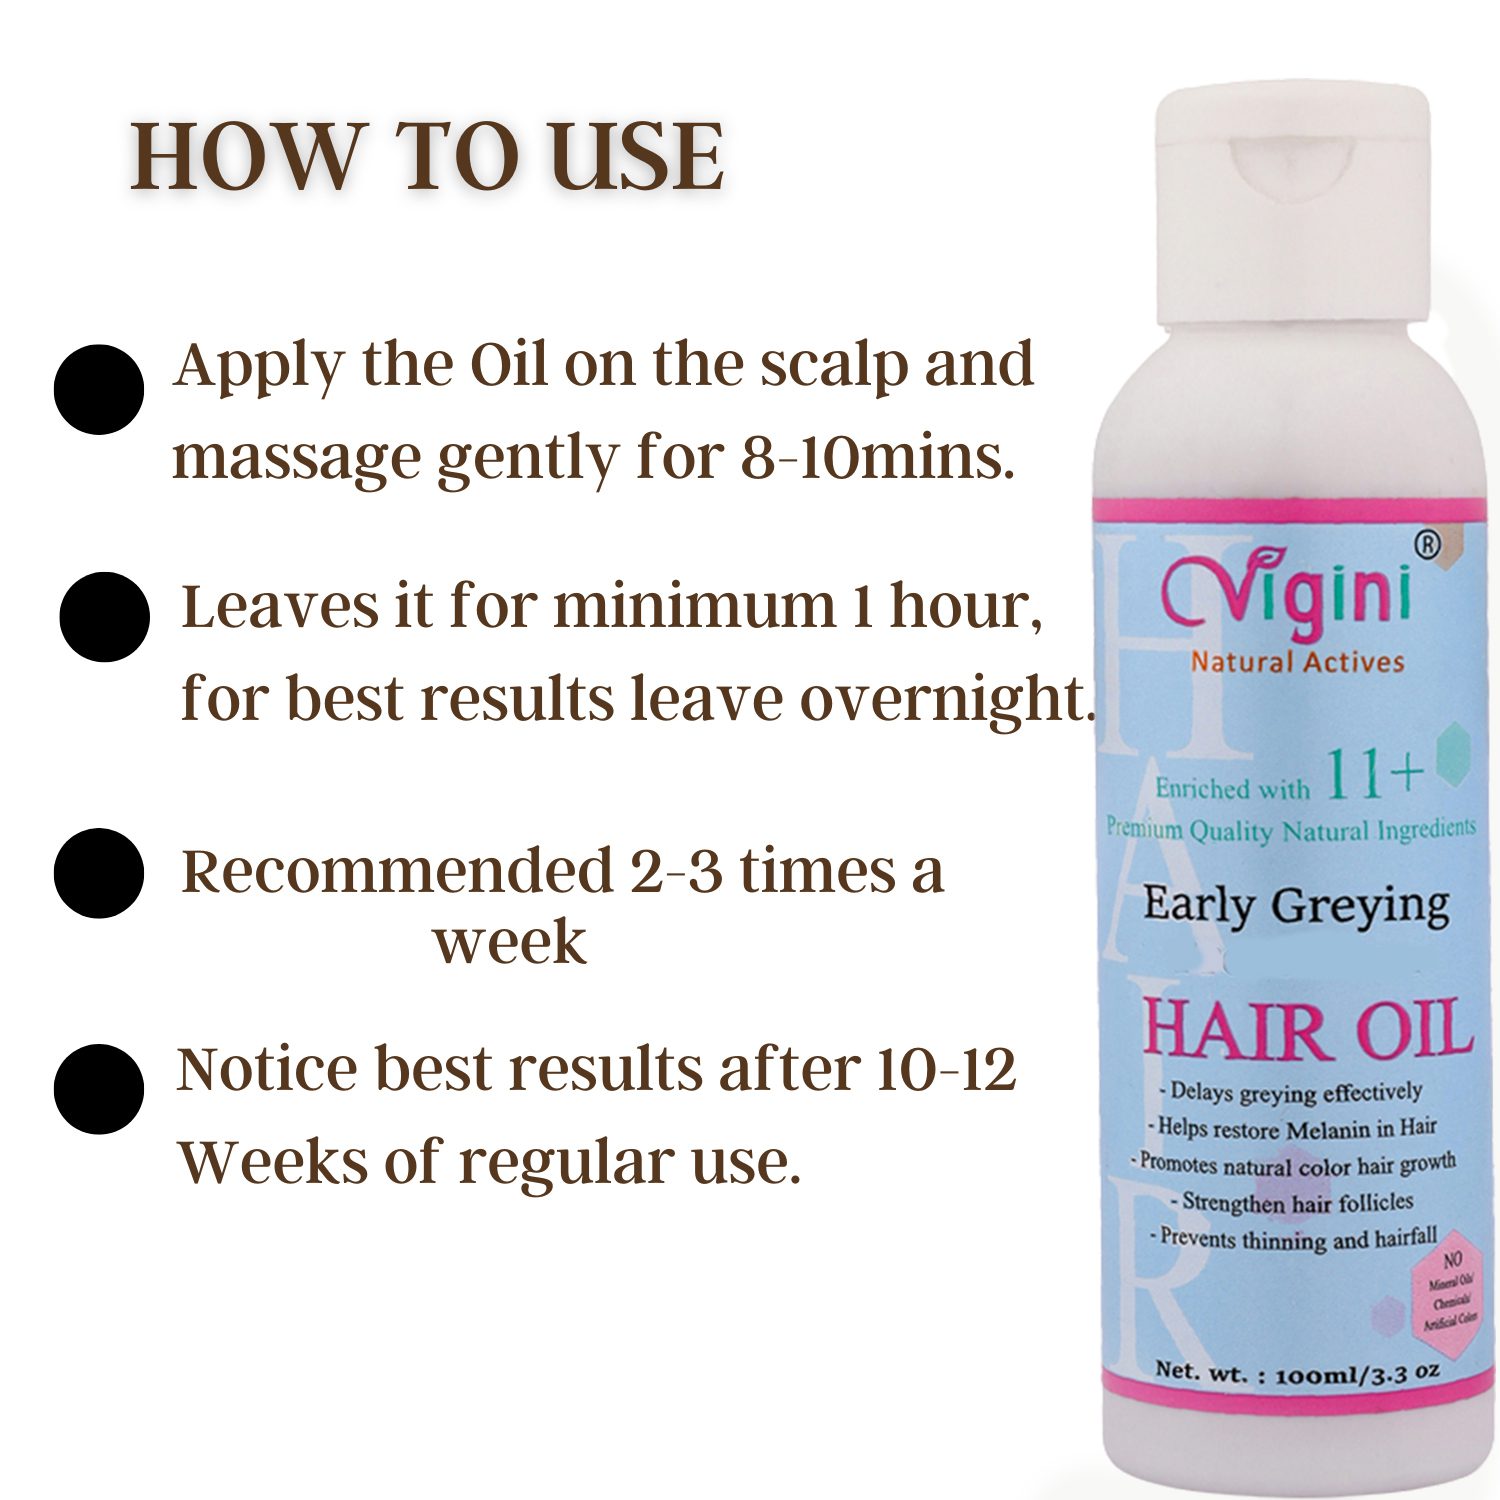 Early Greying Prevention Hair Oil 100ml and Hair Skin Nail (Biotin 10000Mg.) 30Caps